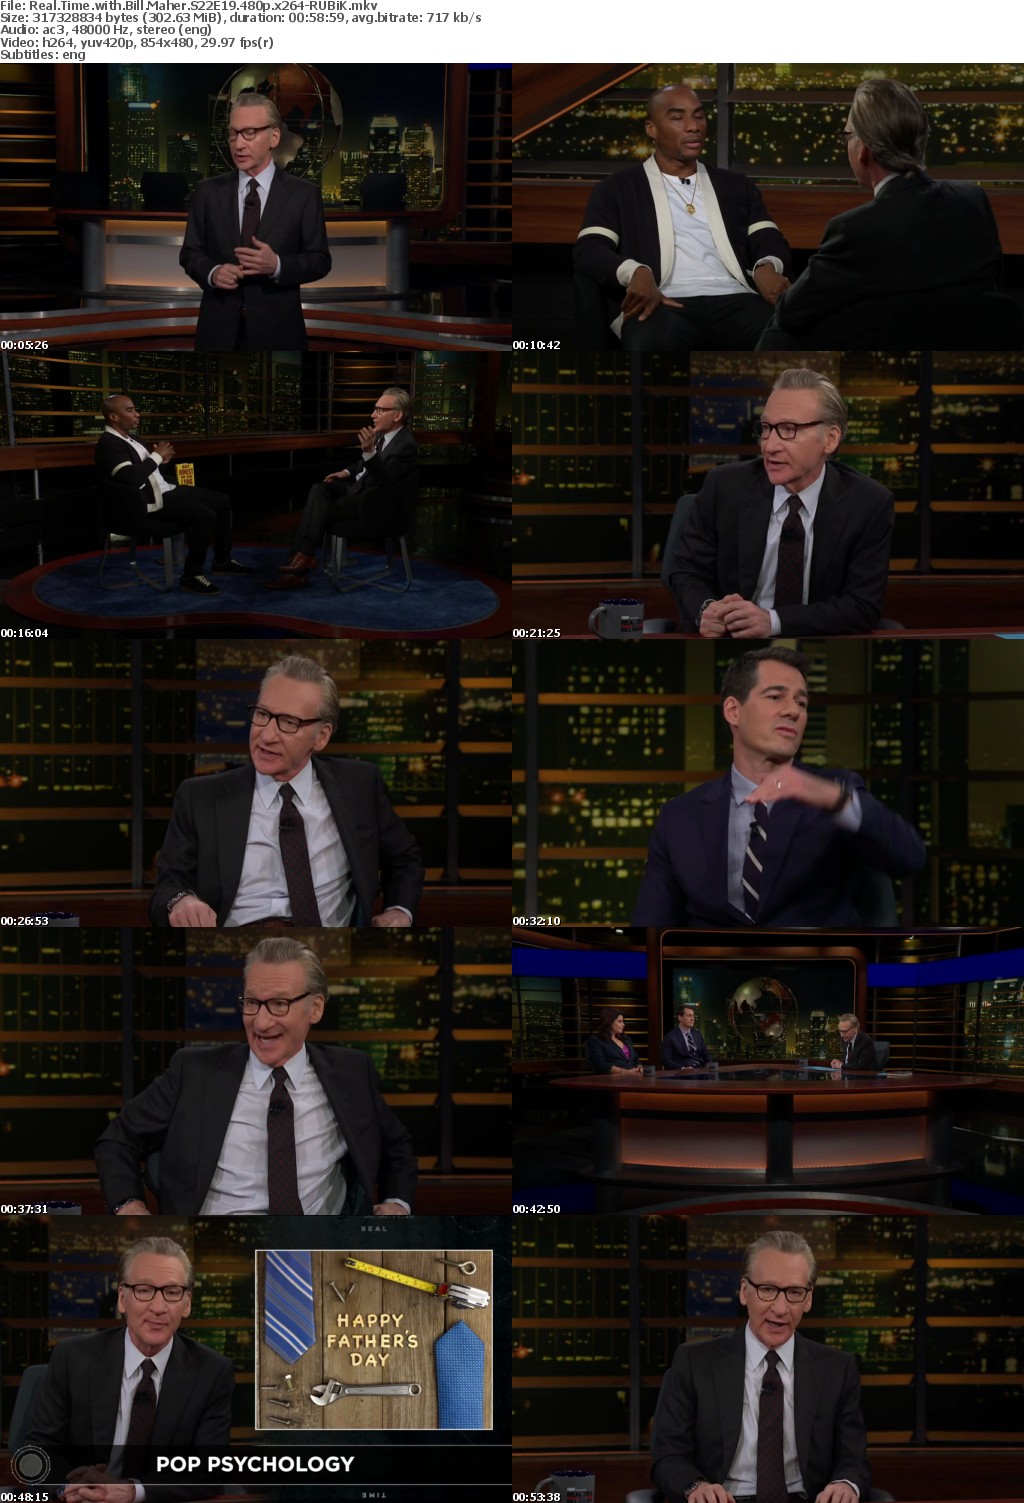 Real Time with Bill Maher S22E19 480p x264-RUBiK Saturn5